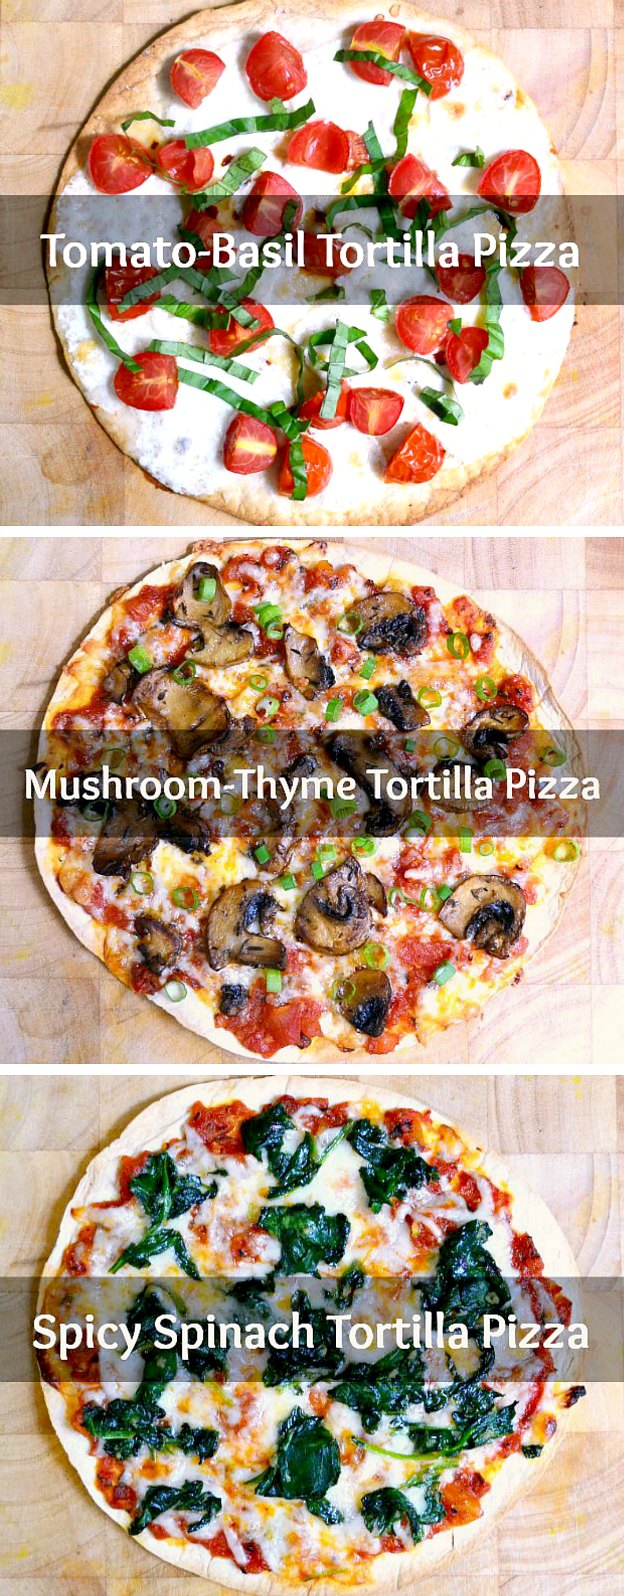 Easy Tortilla Pizzas … 3 ways! Learn how to make healthy Tortilla Pizzas in your oven. This crispy baked vegetarian Tortilla Pizza recipe is made with a flour tortilla crust and your fave toppings, like mushrooms, spinach, or Margherita (tomato basil). They can be made with sauce or no sauce. Your family will love these mini homemade Tortilla Pizzas ... great for kids and adults alike! | Hello Little Home #tortillapizza #pizza #pizzarecipe #minipizza #vegetarianrecipes #vegetarianpizza